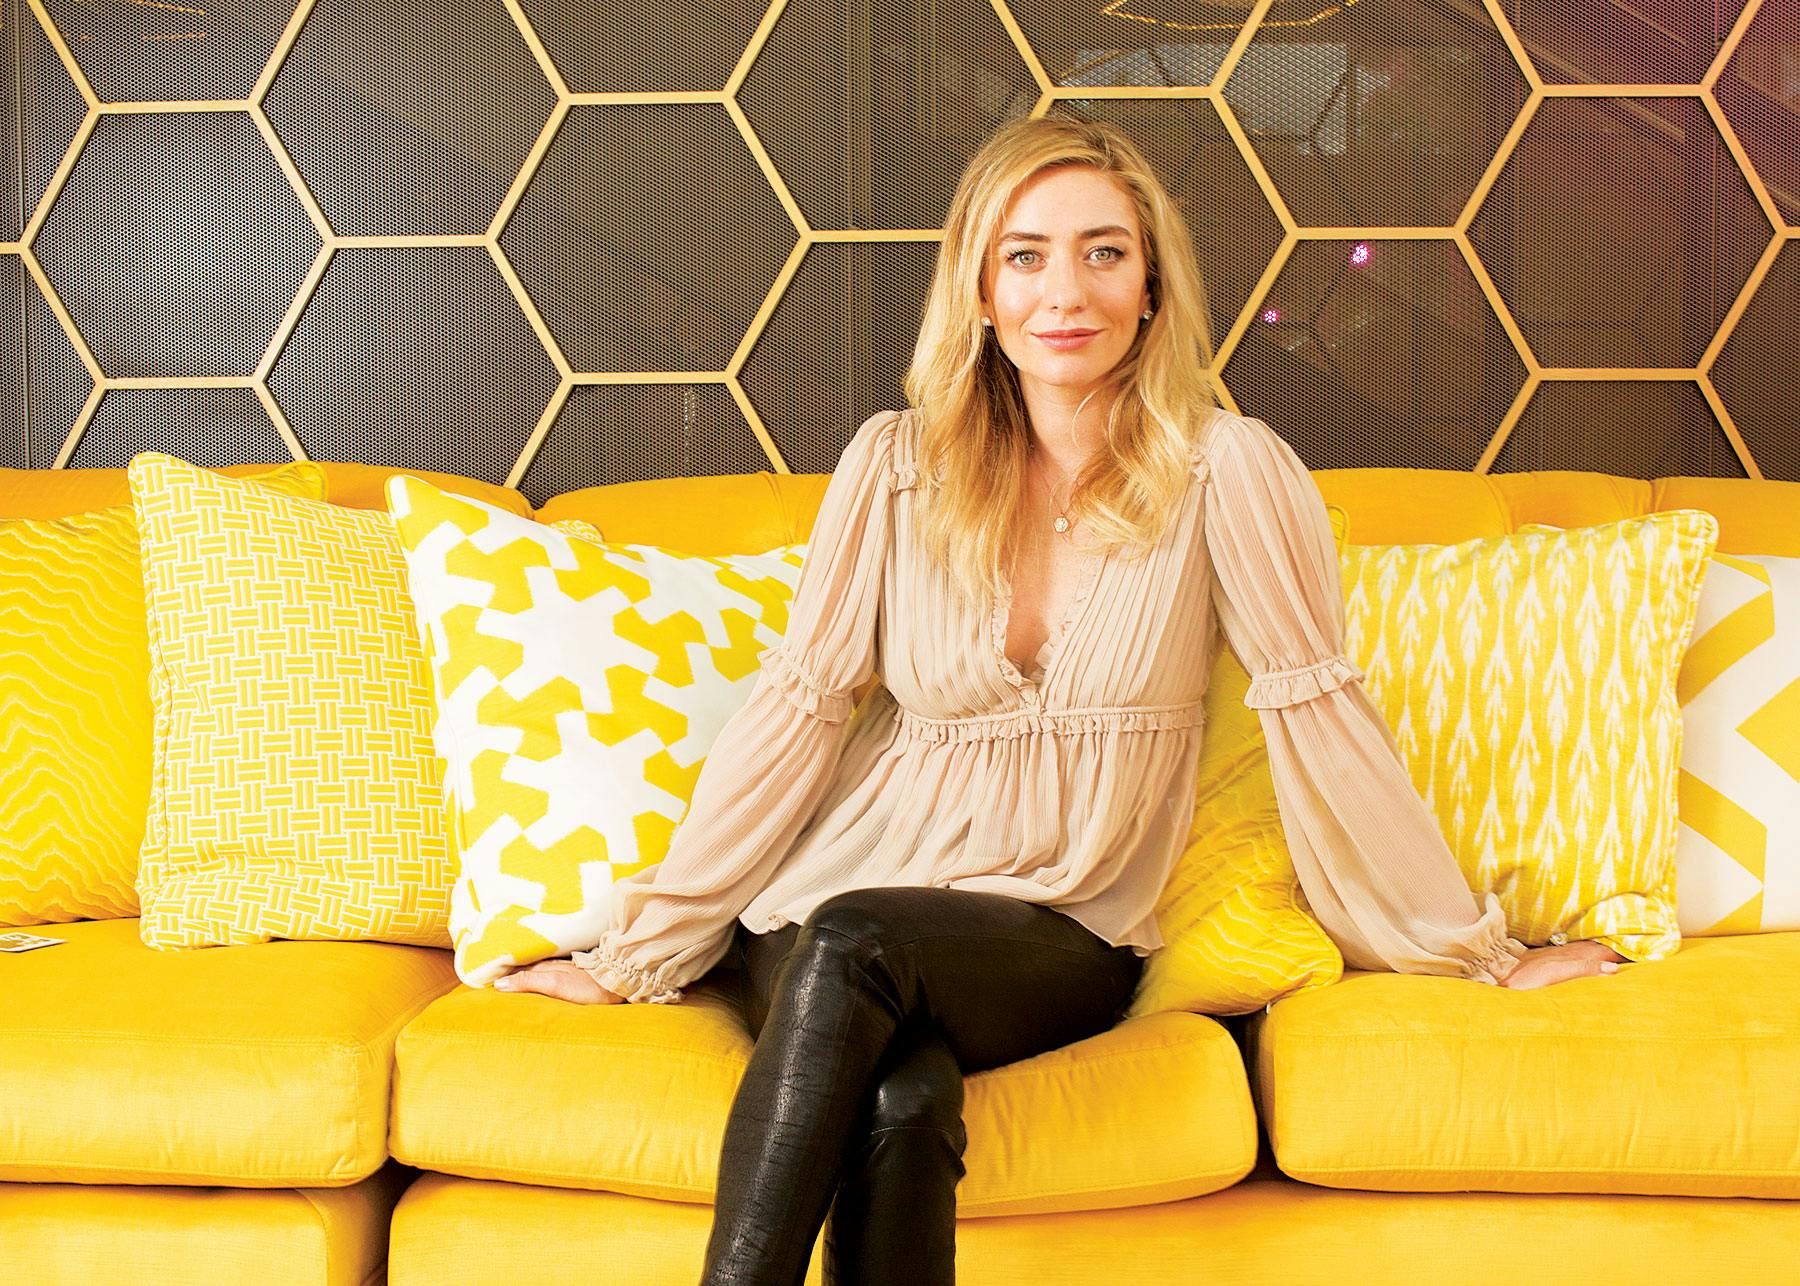 Hottest Girl Ever Fucked - How Whitney Wolfe Herd Changed the Dating Game â€“ Texas Monthly